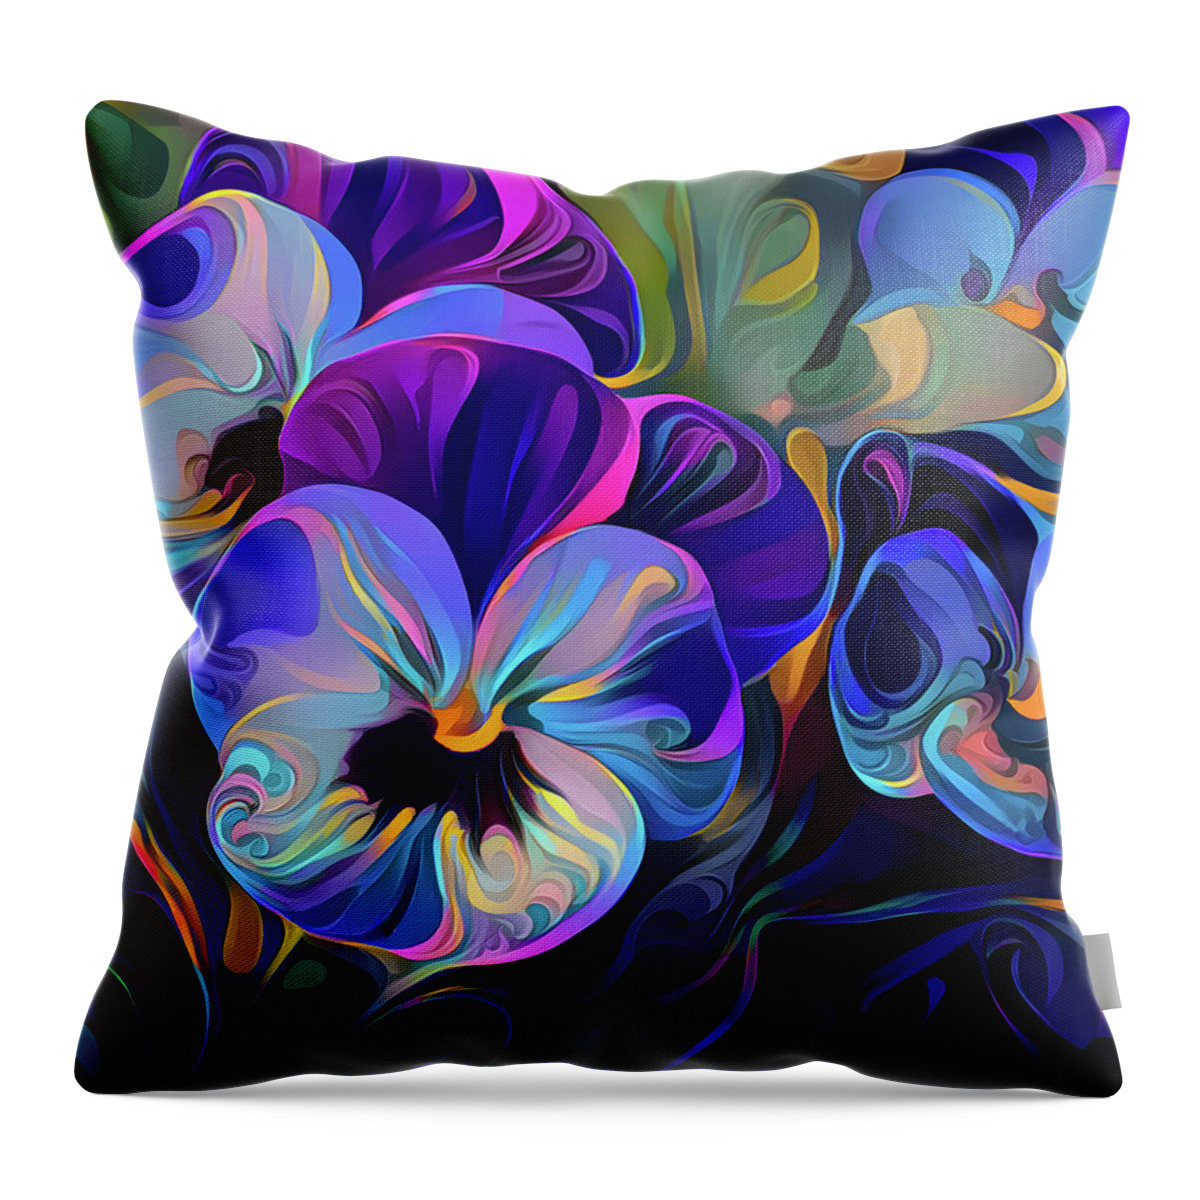 Pansies Throw Pillow featuring the digital art Abstract Pansies by Peggy Collins